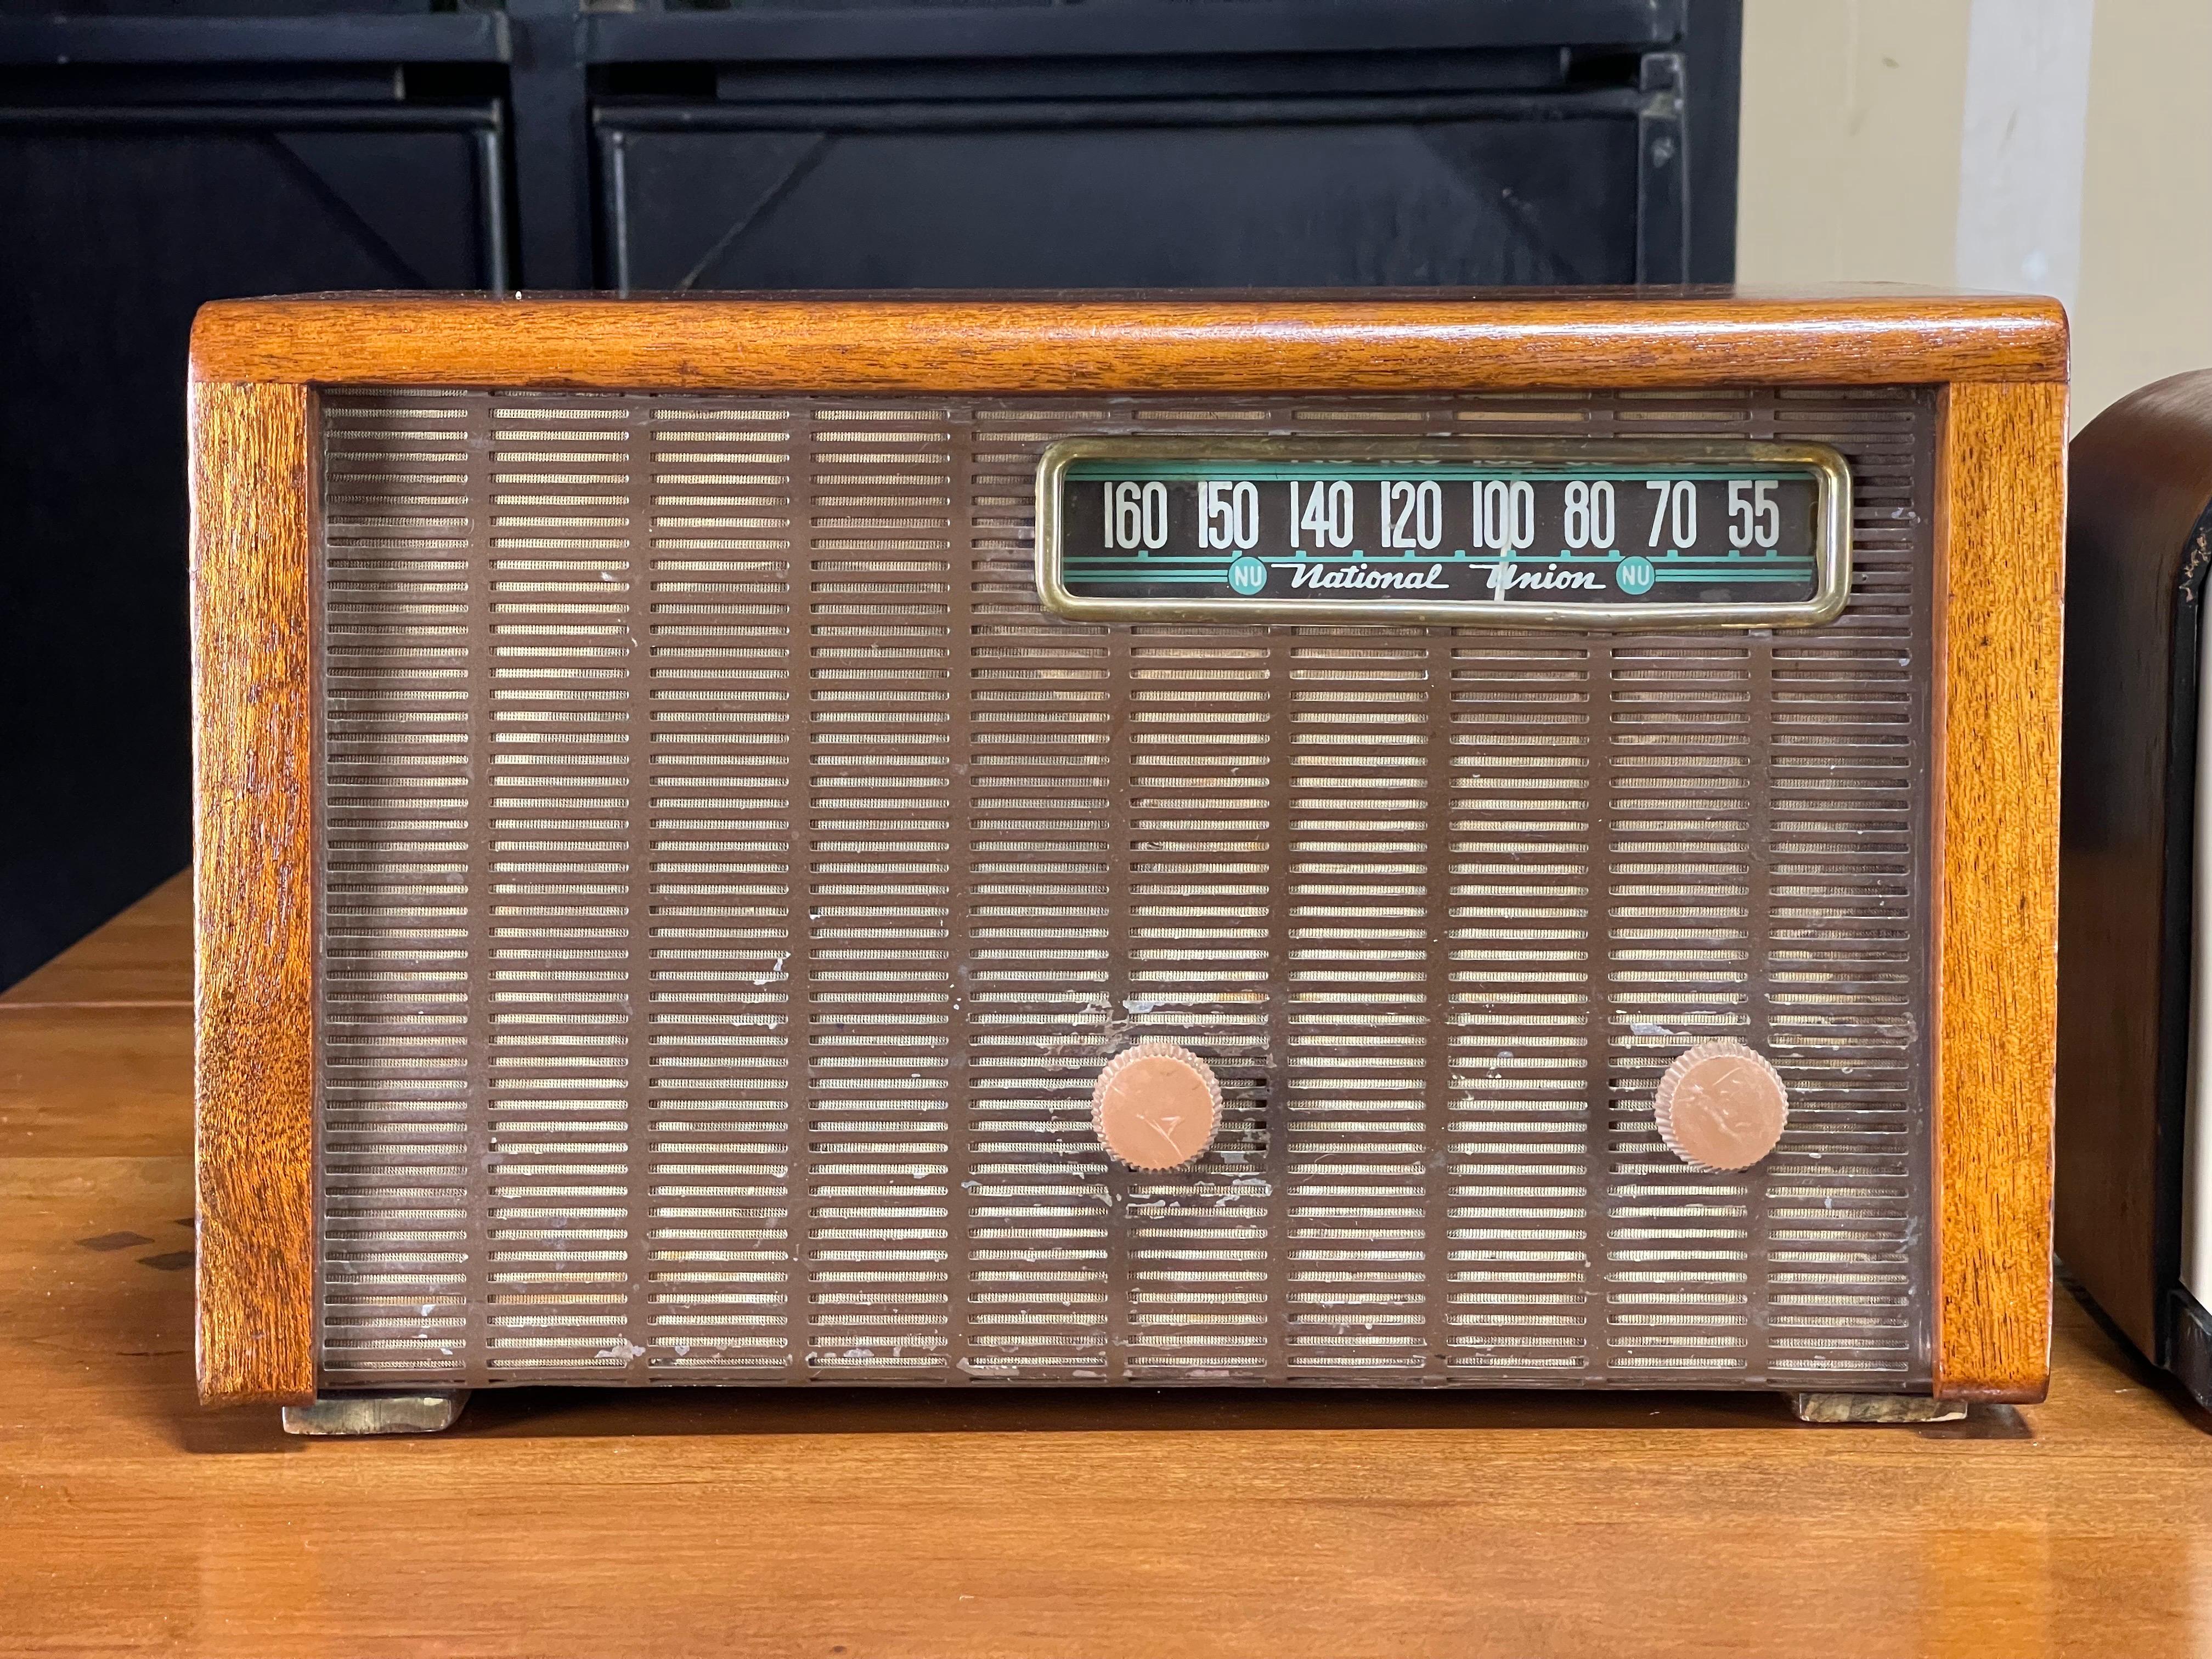 Plastic Collection of Vintage Antique Alexander Girard Radios For Sale